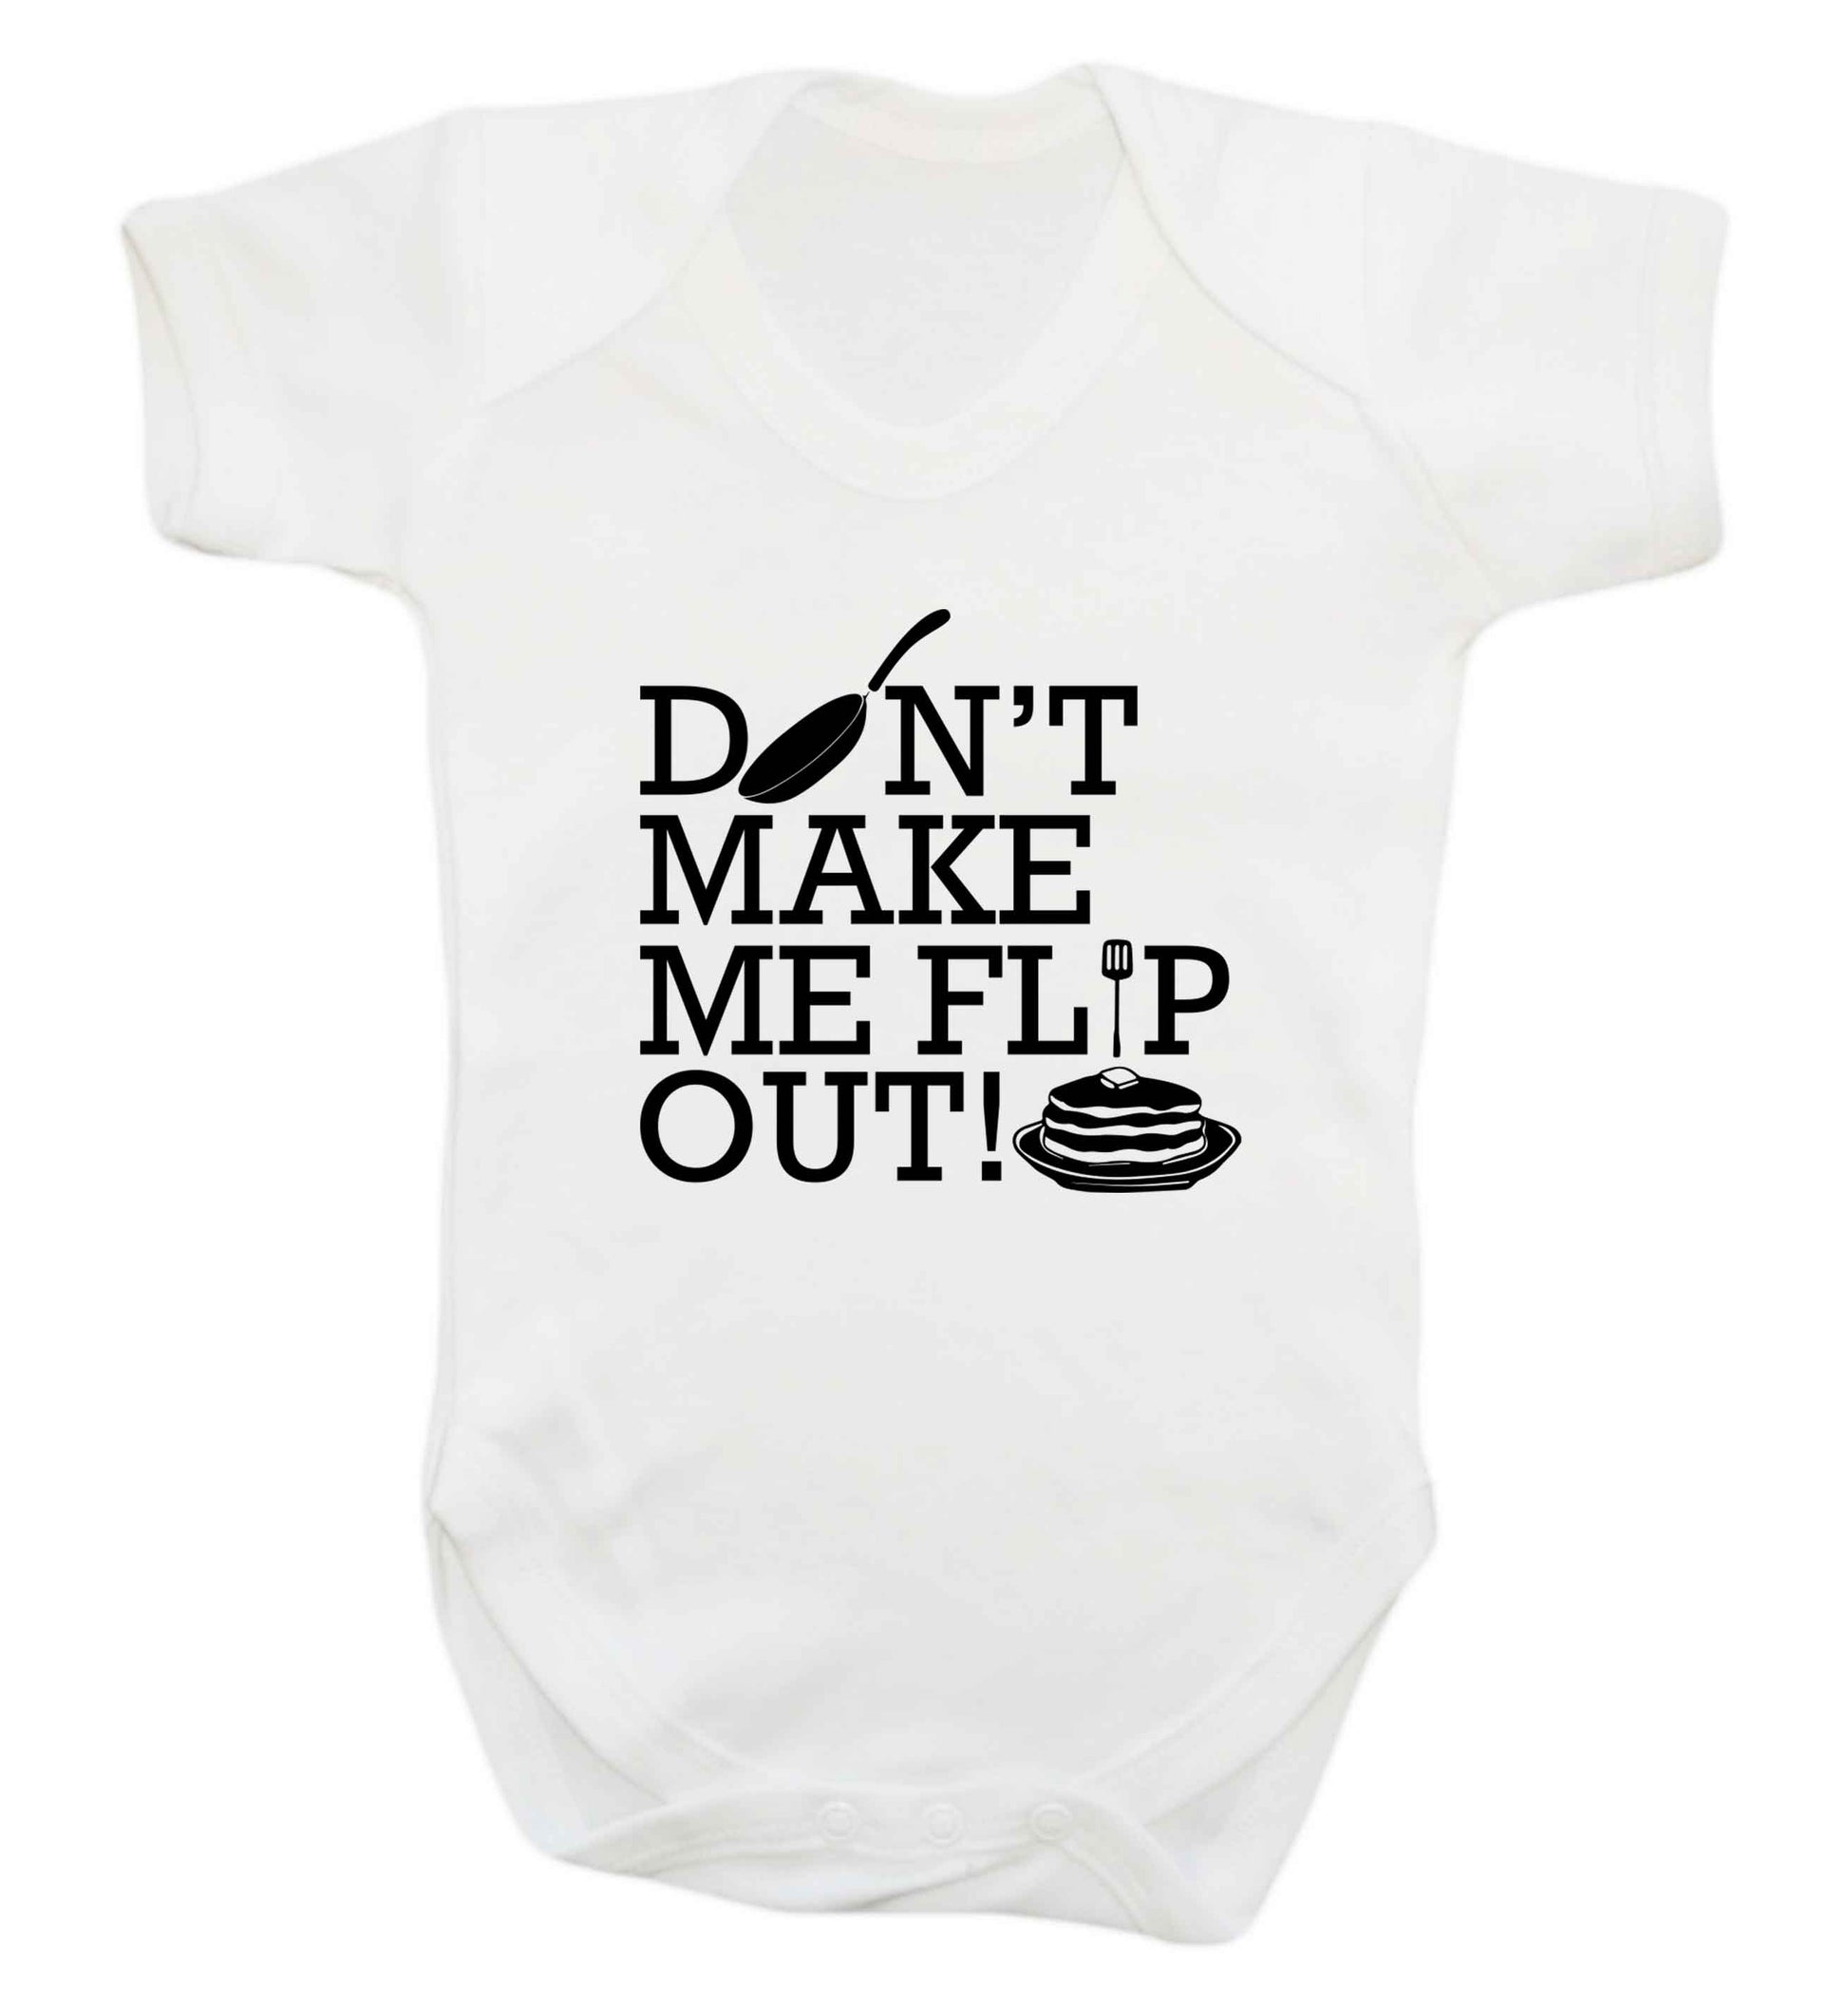 Don't make me flip out baby vest white 18-24 months